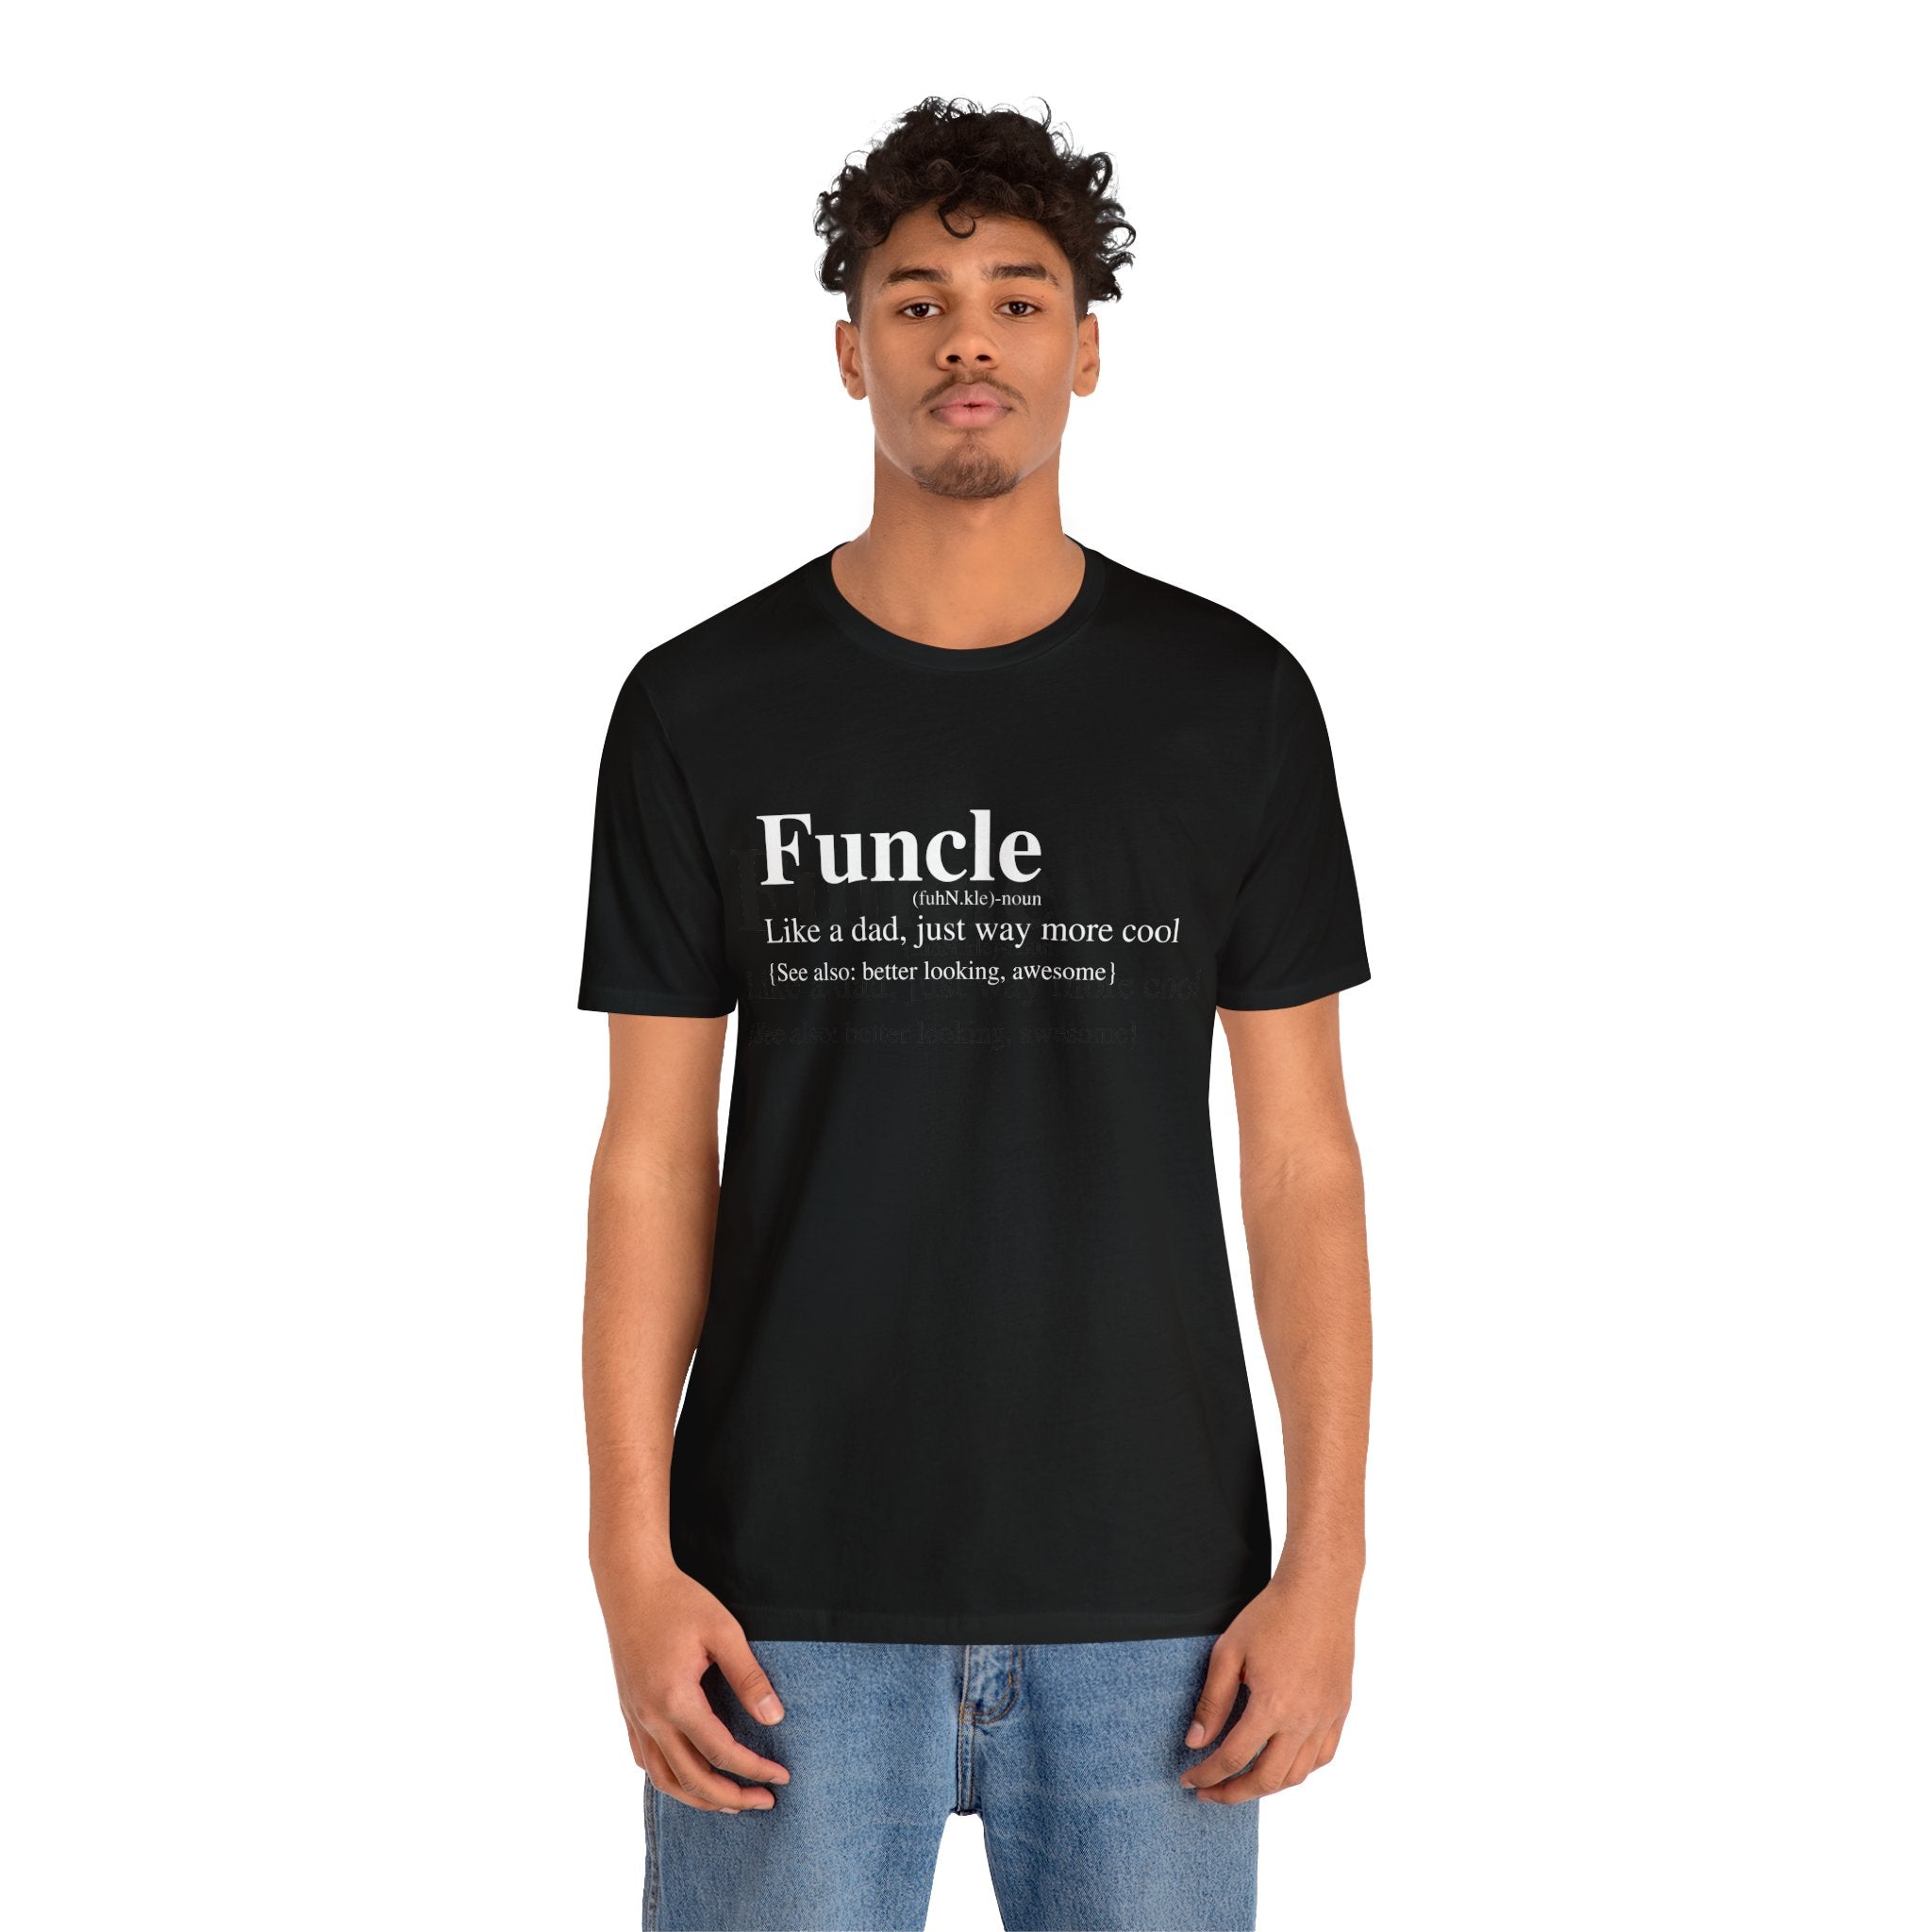 Young man wearing a black Funcle T-Shirt with the text "Funcle T-Shirt: like a dad, just way more cool" printed on it.